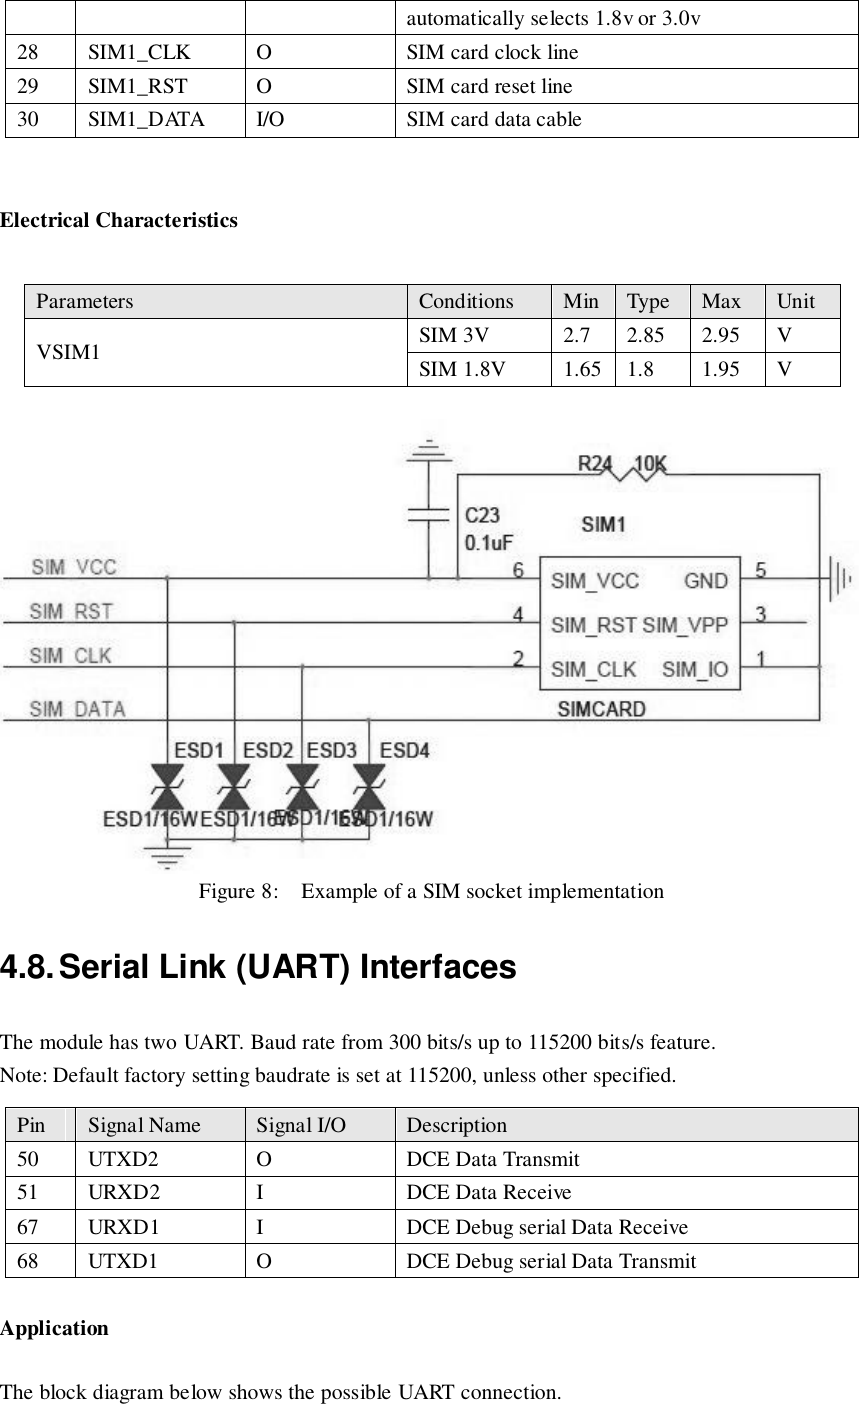  Electrical Characteristics   Figure 8:    Example of a SIM socket implementation 4.8. Serial Link (UART) Interfaces The module has two UART. Baud rate from 300 bits/s up to 115200 bits/s feature. Note: Default factory setting baudrate is set at 115200, unless other specified. Application The block diagram below shows the possible UART connection. automatically selects 1.8v or 3.0v 28 SIM1_CLK O SIM card clock line 29 SIM1_RST O SIM card reset line 30 SIM1_DATA I/O SIM card data cable Parameters Conditions Min Type Max Unit VSIM1 SIM 3V 2.7 2.85 2.95 V SIM 1.8V 1.65 1.8 1.95 V Pin Signal Name Signal I/O Description 50 UTXD2 O DCE Data Transmit 51 URXD2 I DCE Data Receive 67 URXD1 I DCE Debug serial Data Receive 68 UTXD1 O DCE Debug serial Data Transmit 